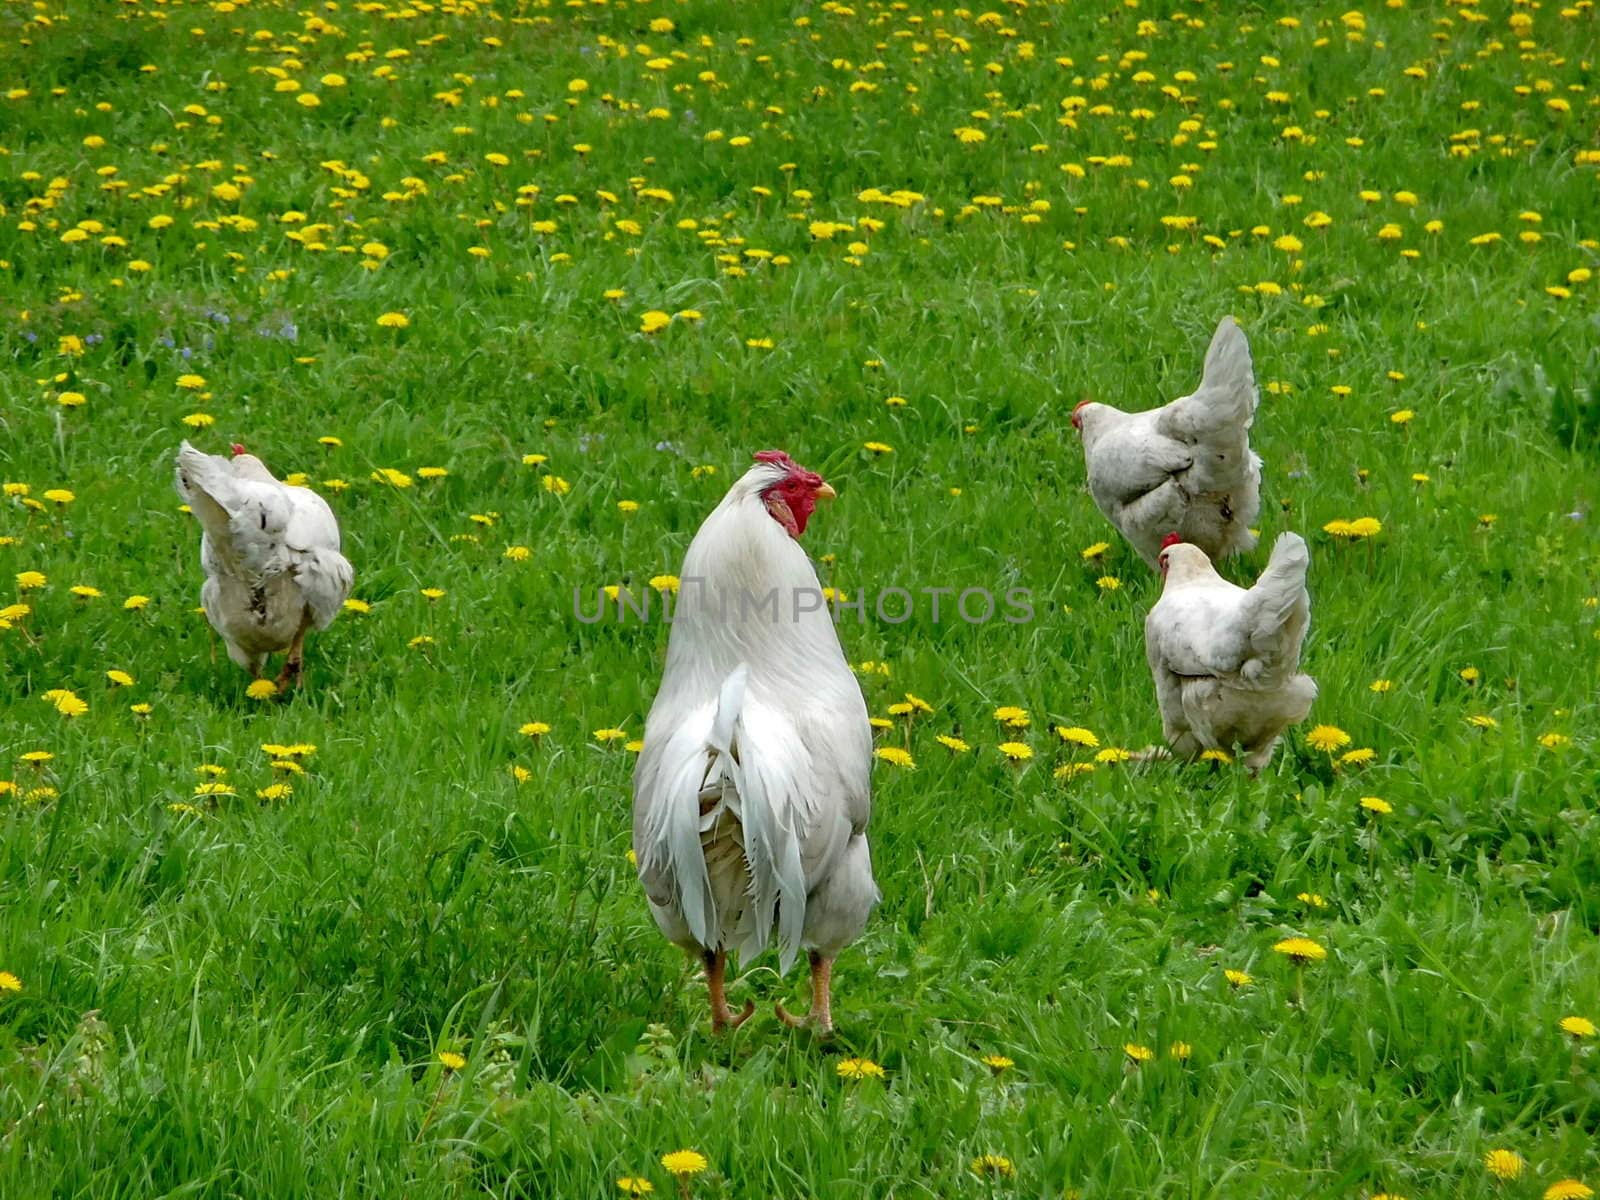 Hens on grass by tomatto